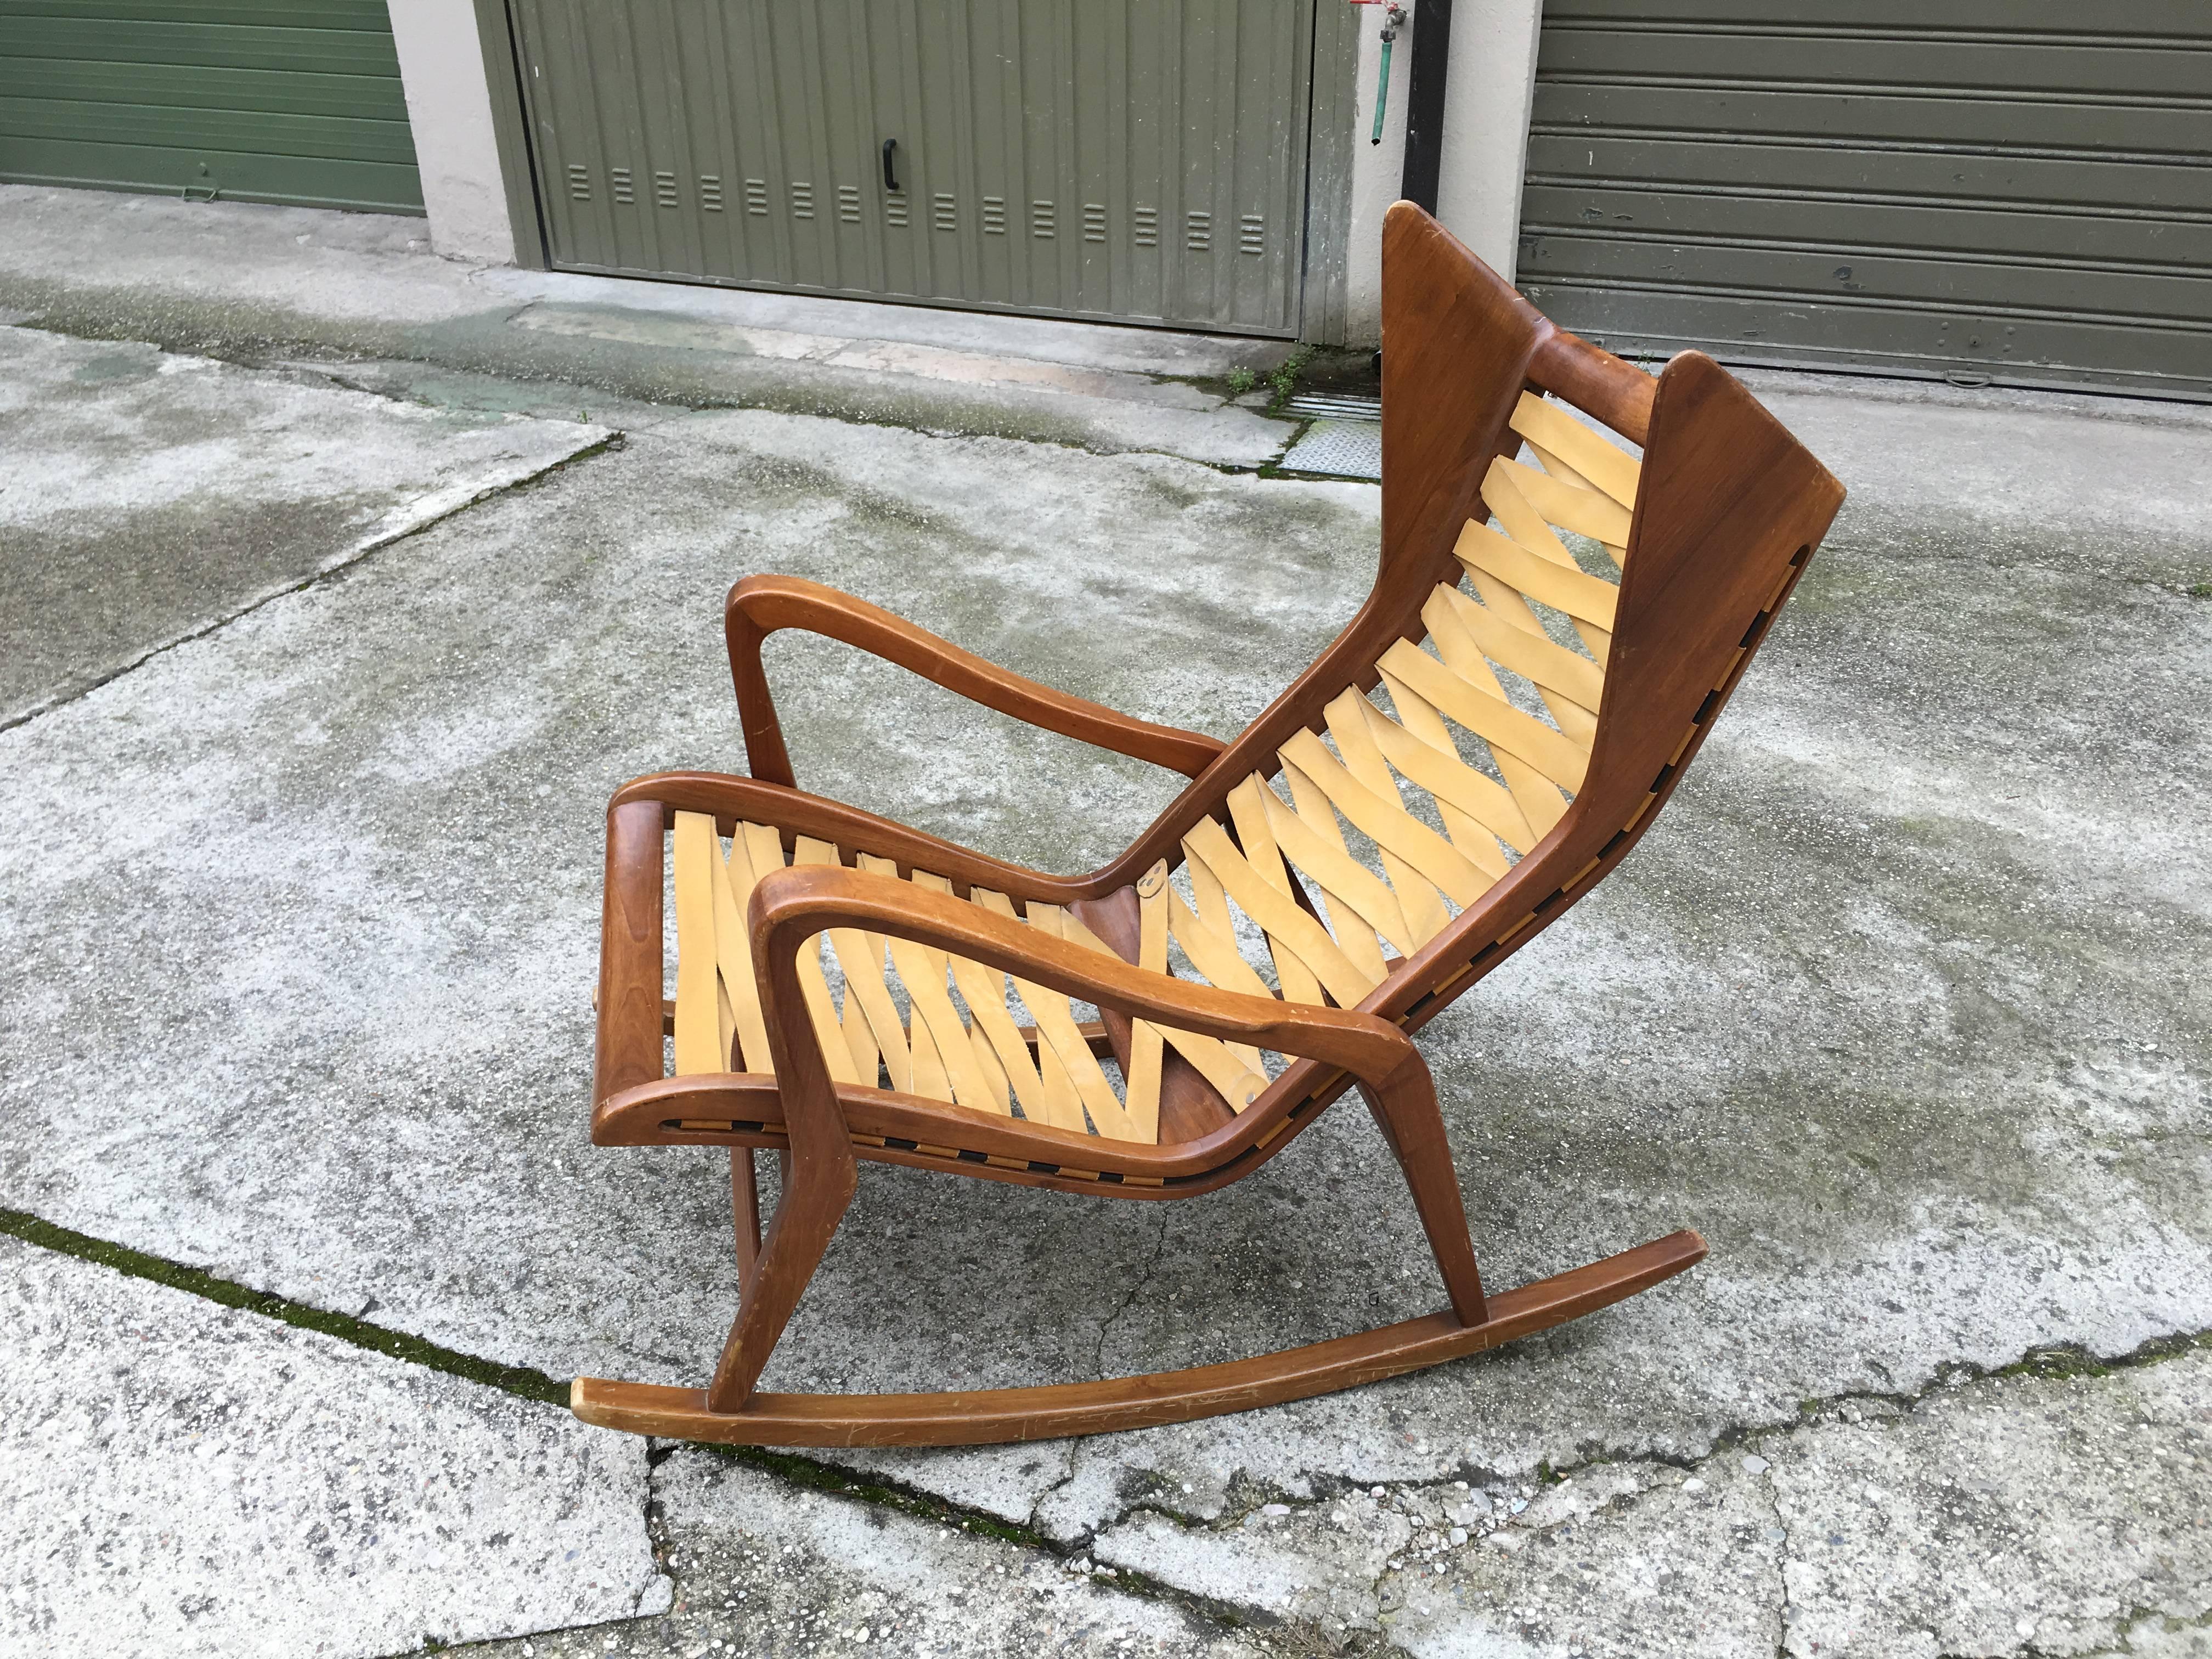 Italian Rocking Chair by Gio Ponti, Manufactured by Cassina